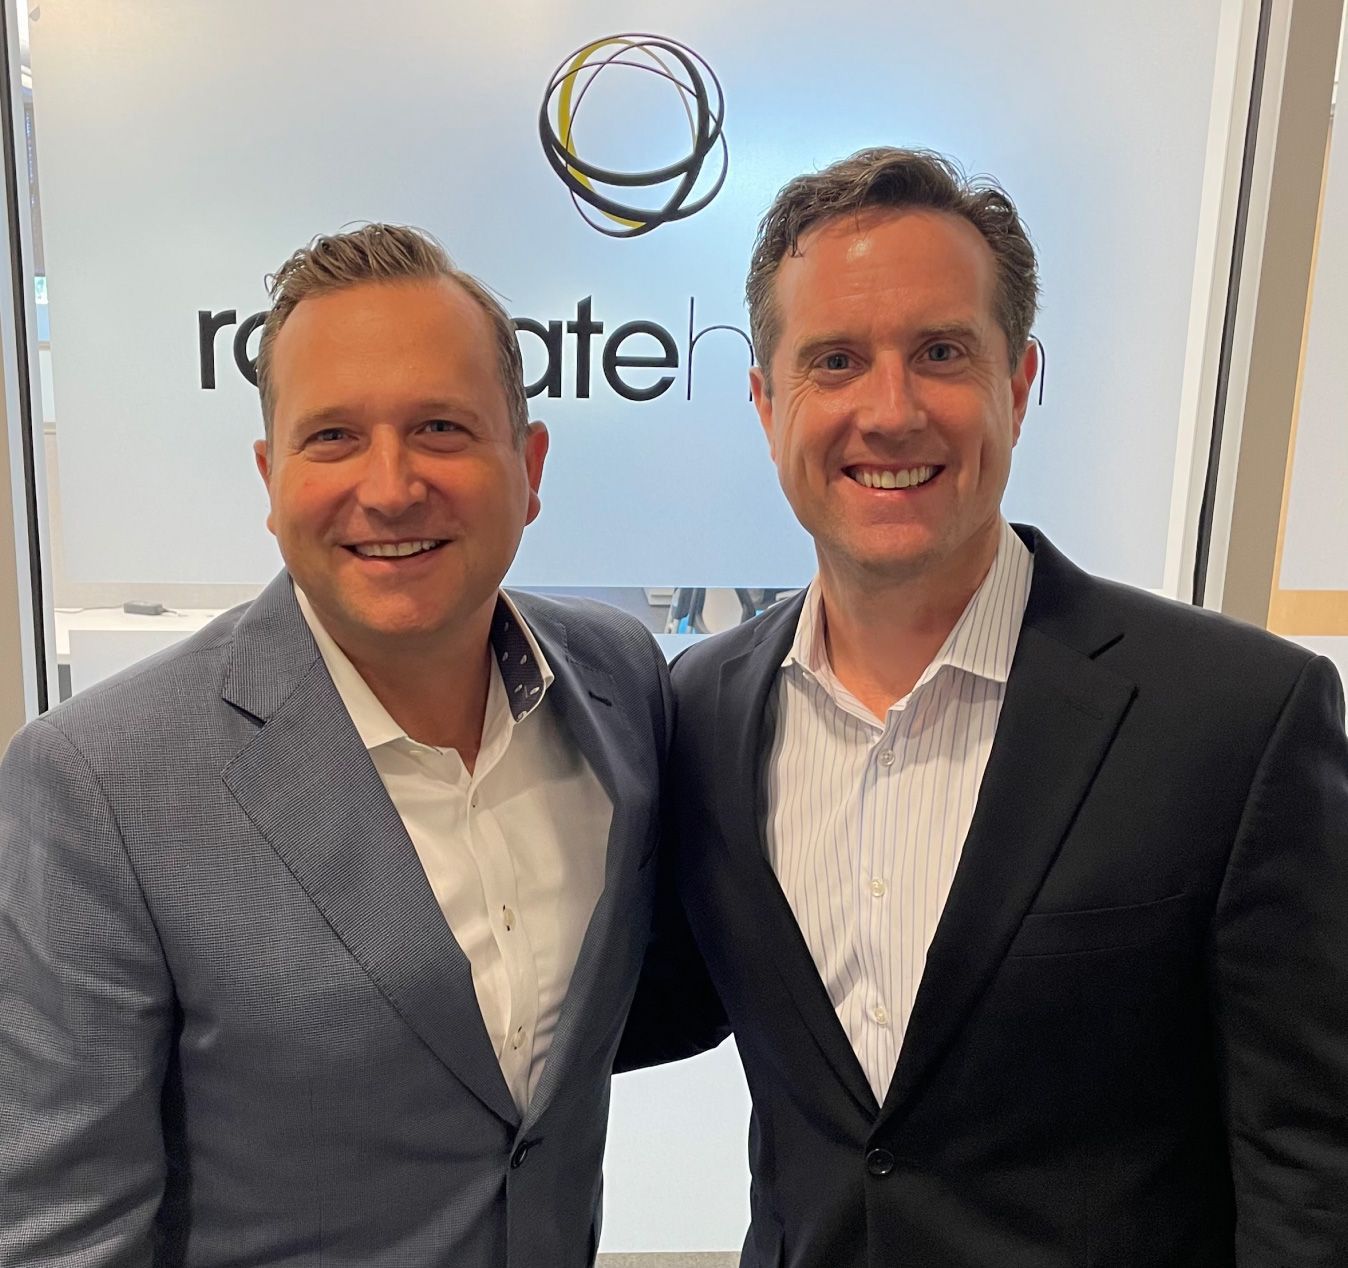 Relevate Health Announces New CEO